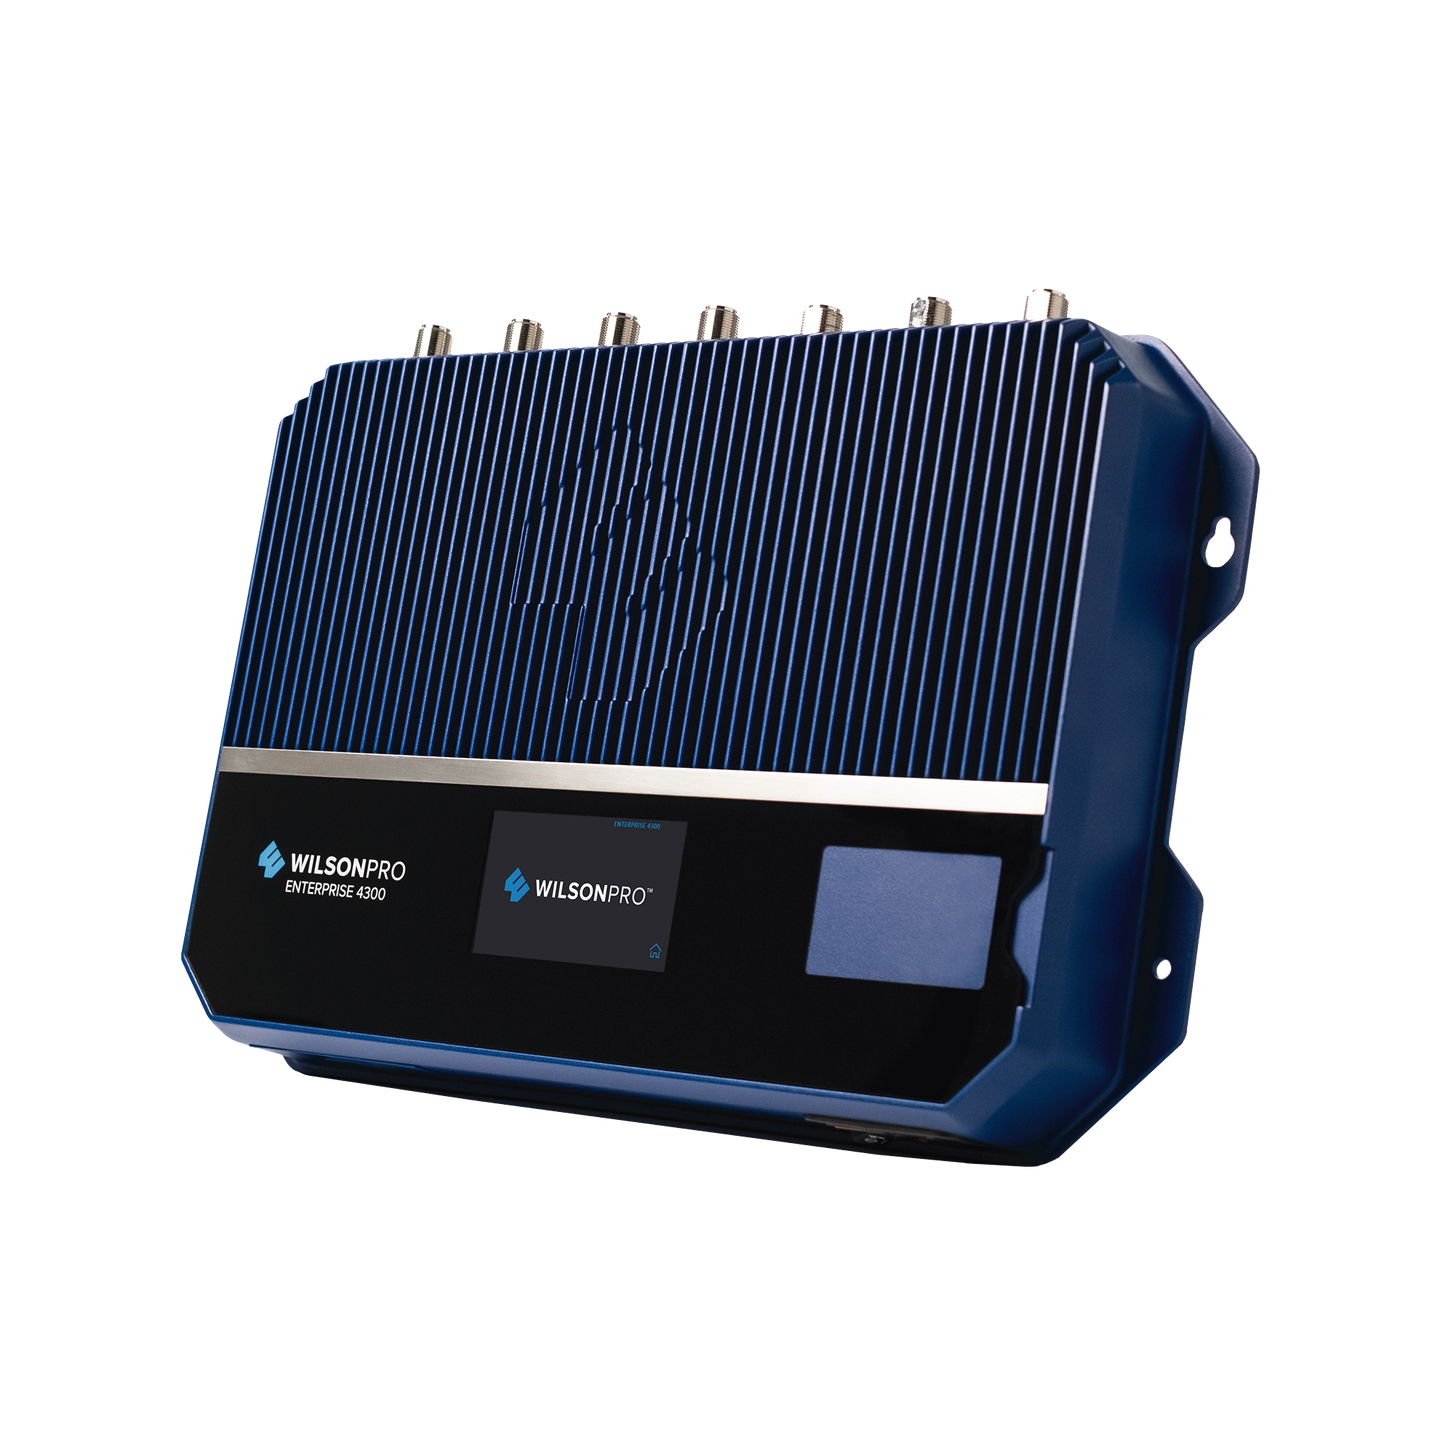 ENTERPRISE 4300 Cell Signal Booster | +26 dBm max uplink power, +17 dBm max downlink power on each indoor antenna port | Covers up to 100,000 sq. ft. per amplifier with enhanced cell signal on all available network speeds